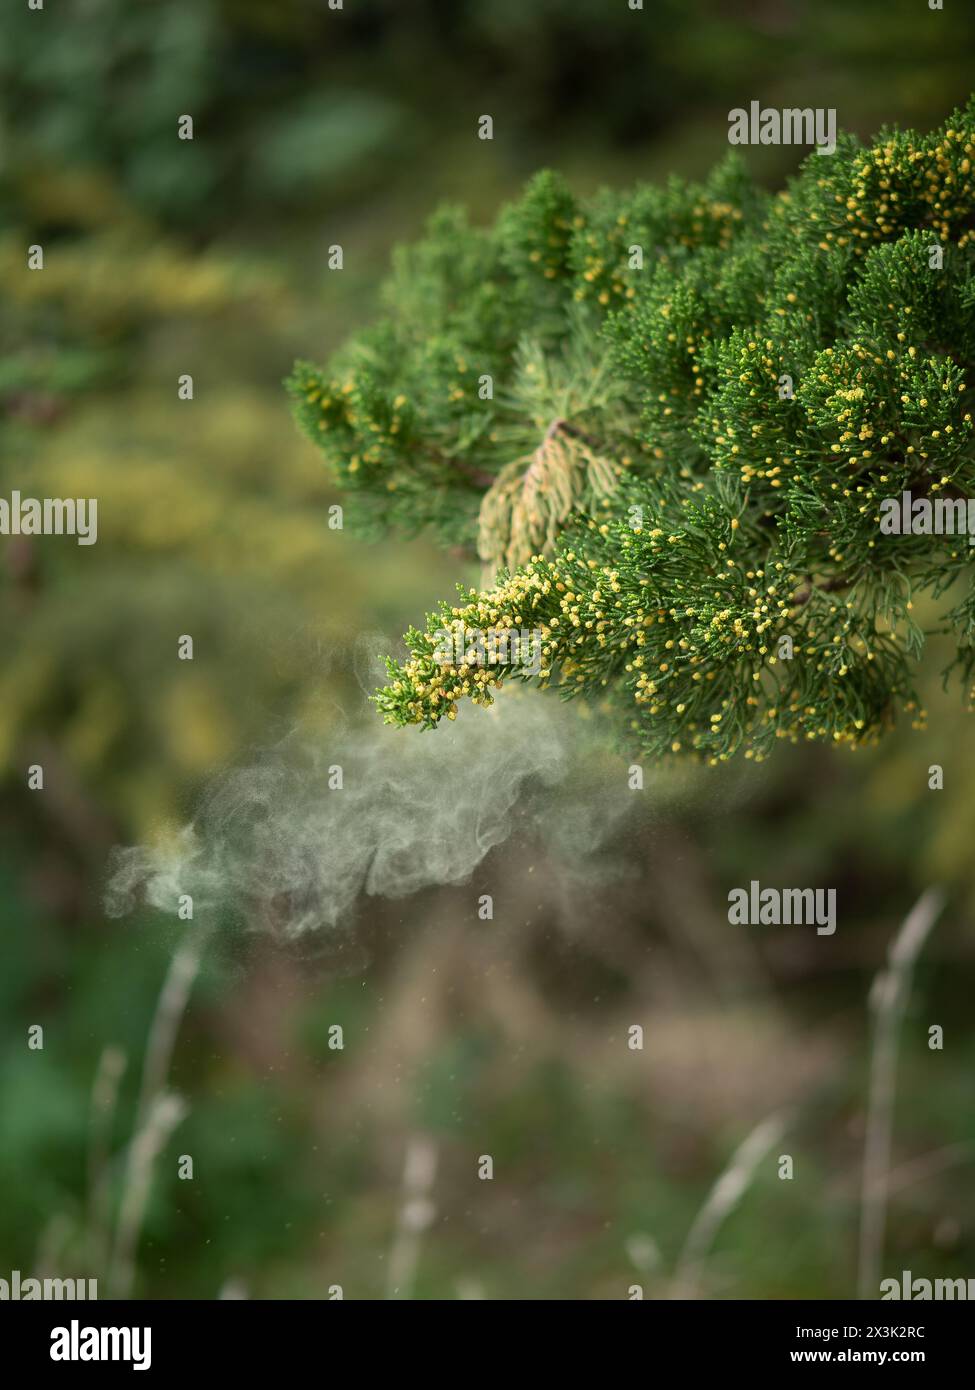 Embarking on a mystical journey through nature, surrounded by smoking pollen plants Stock Photo